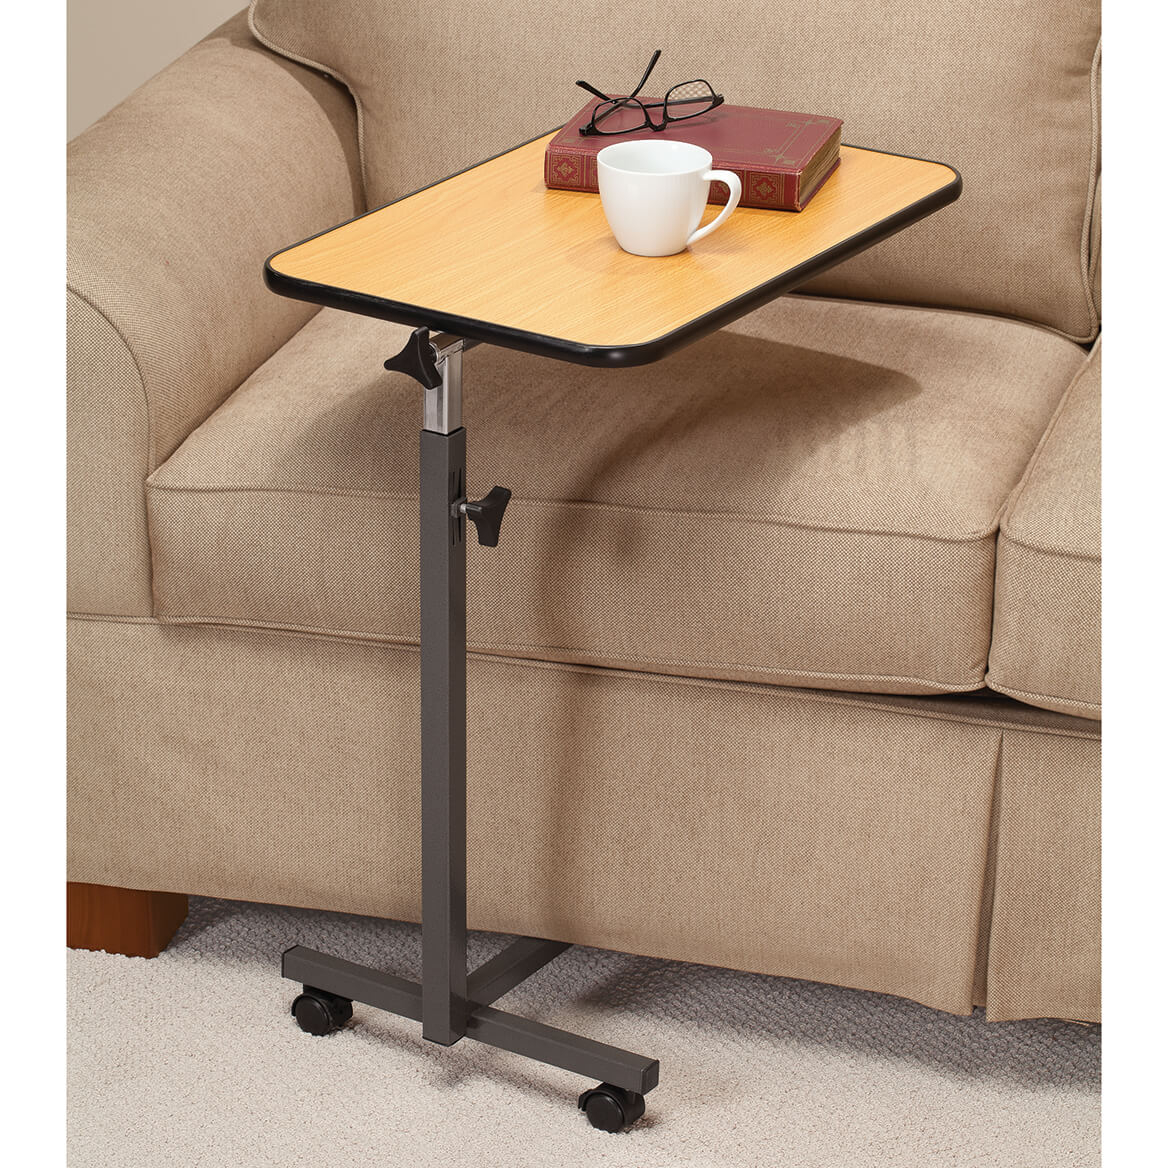 EasyComforts Rolling Tray Table